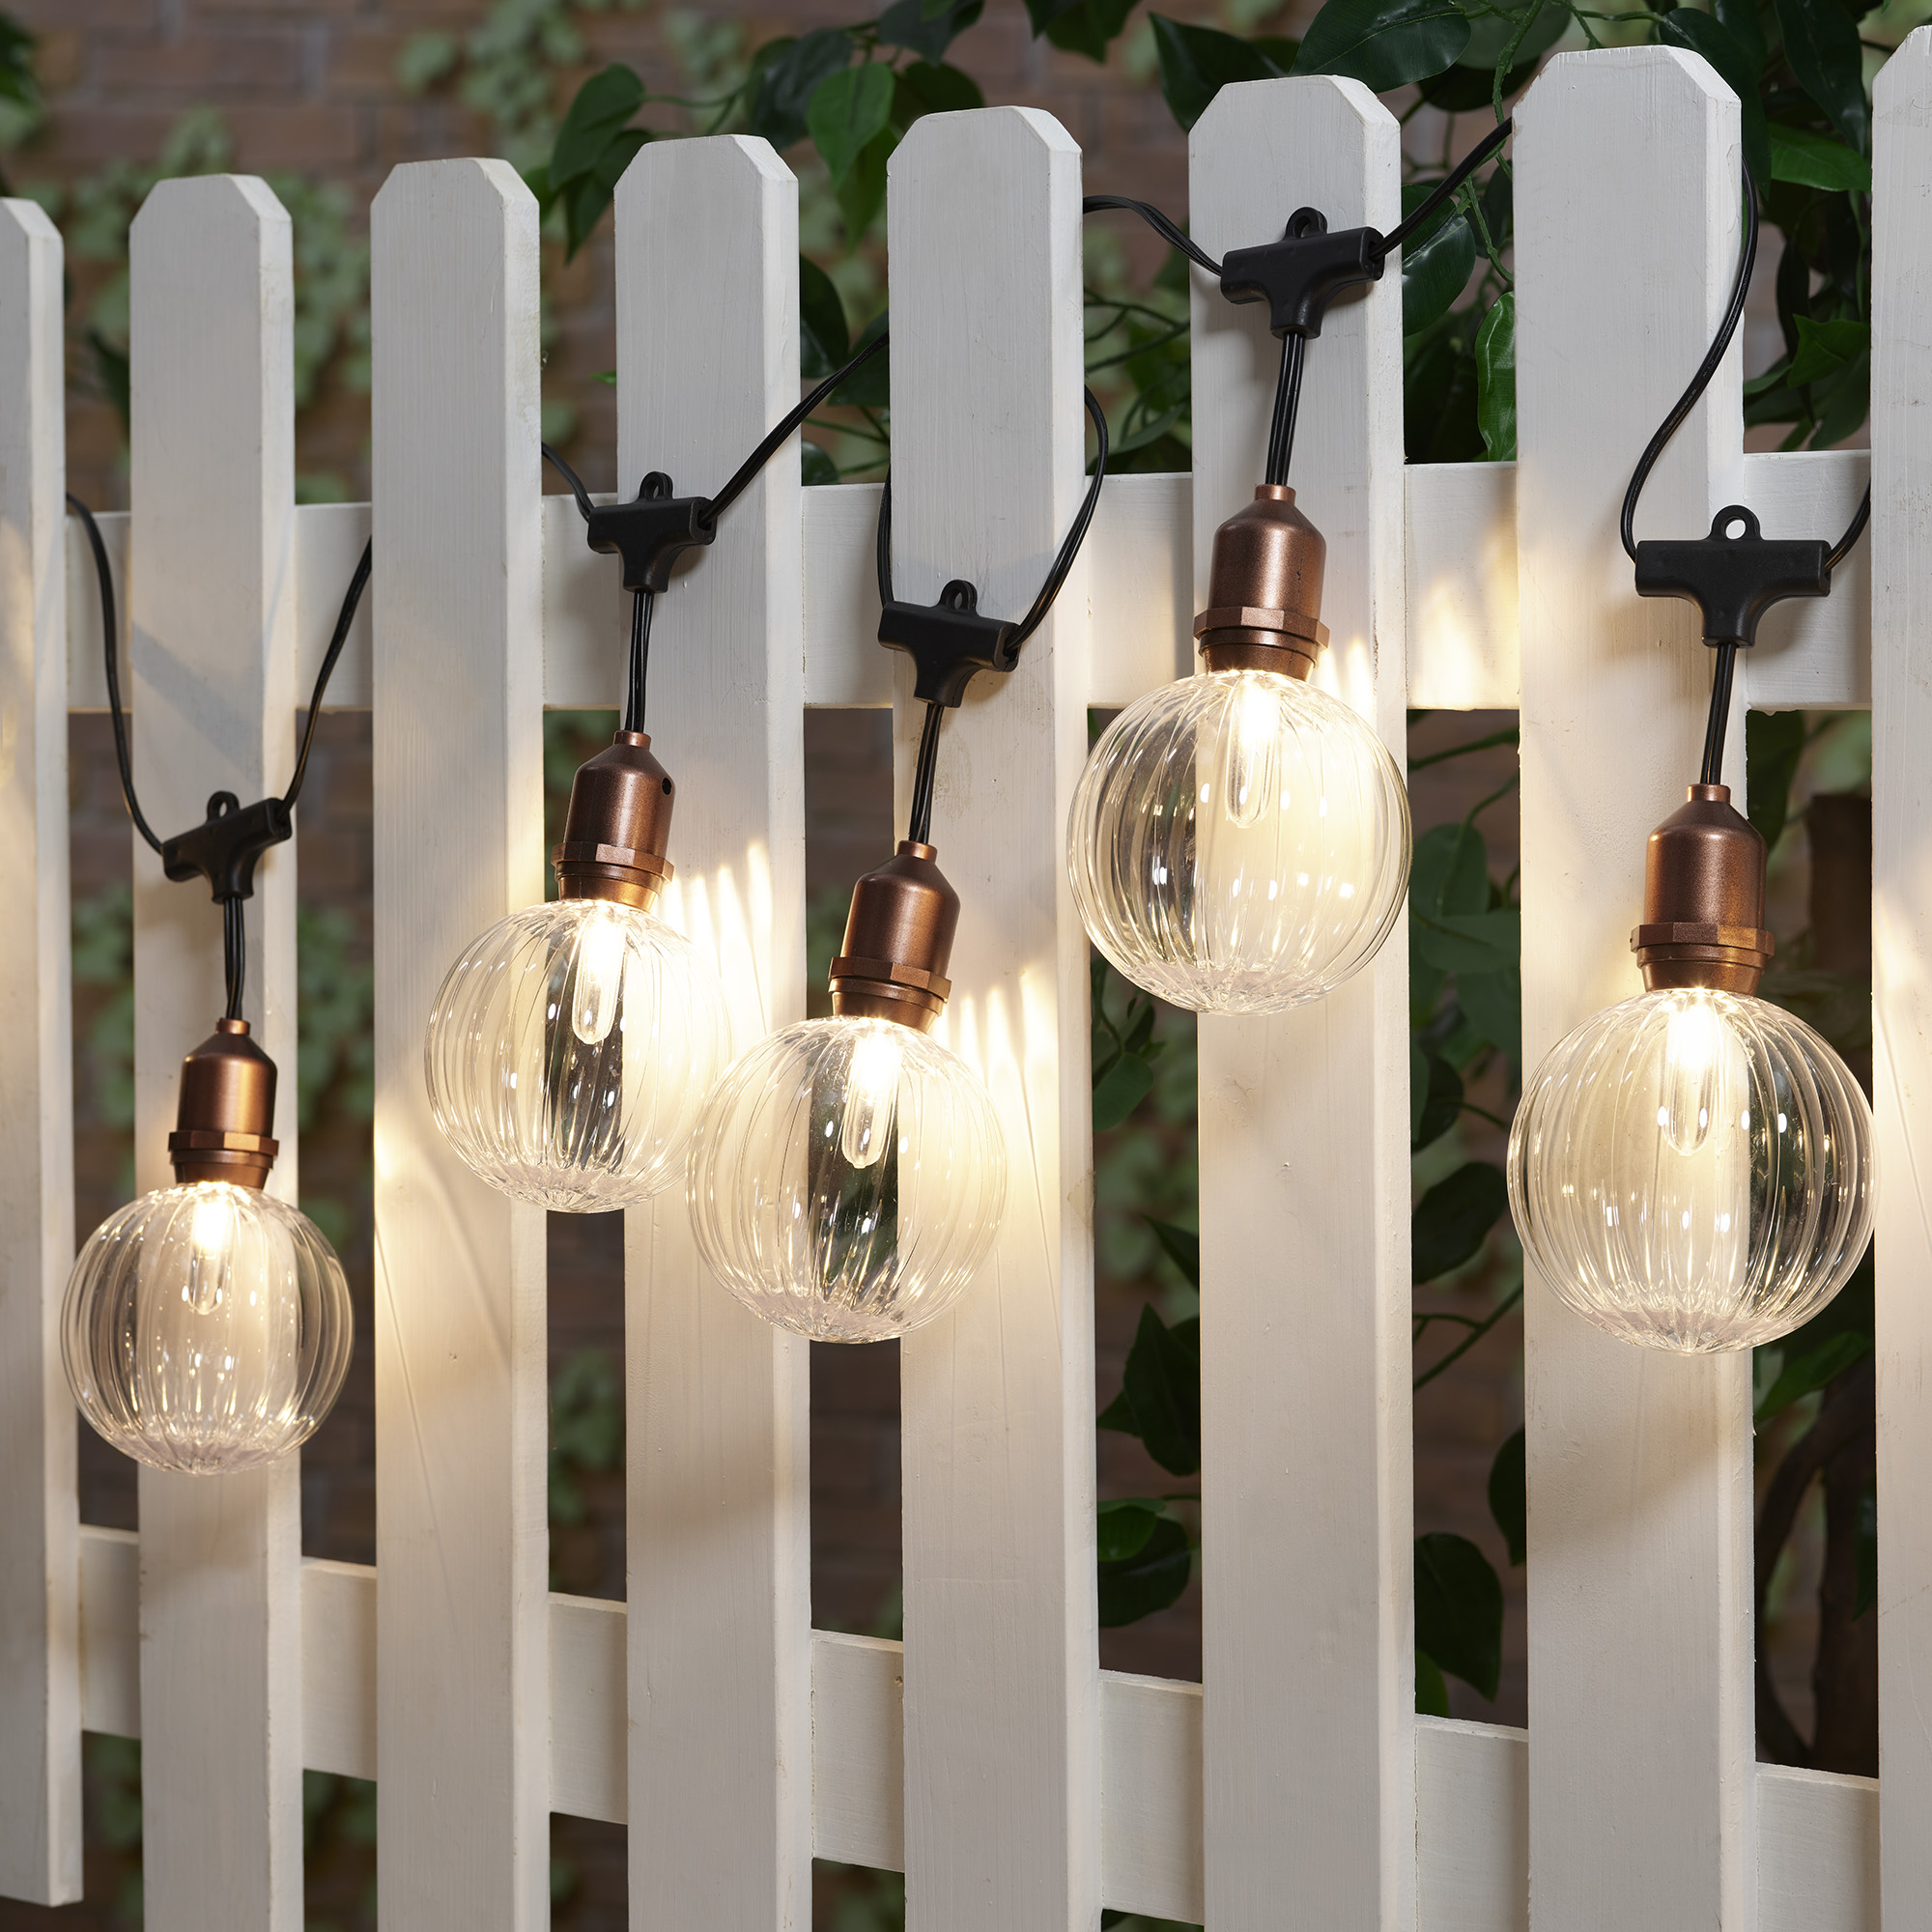 Better Homes & Gardens 10-Count Warm White LED Ribbed Outdoor String Lights - image 3 of 9